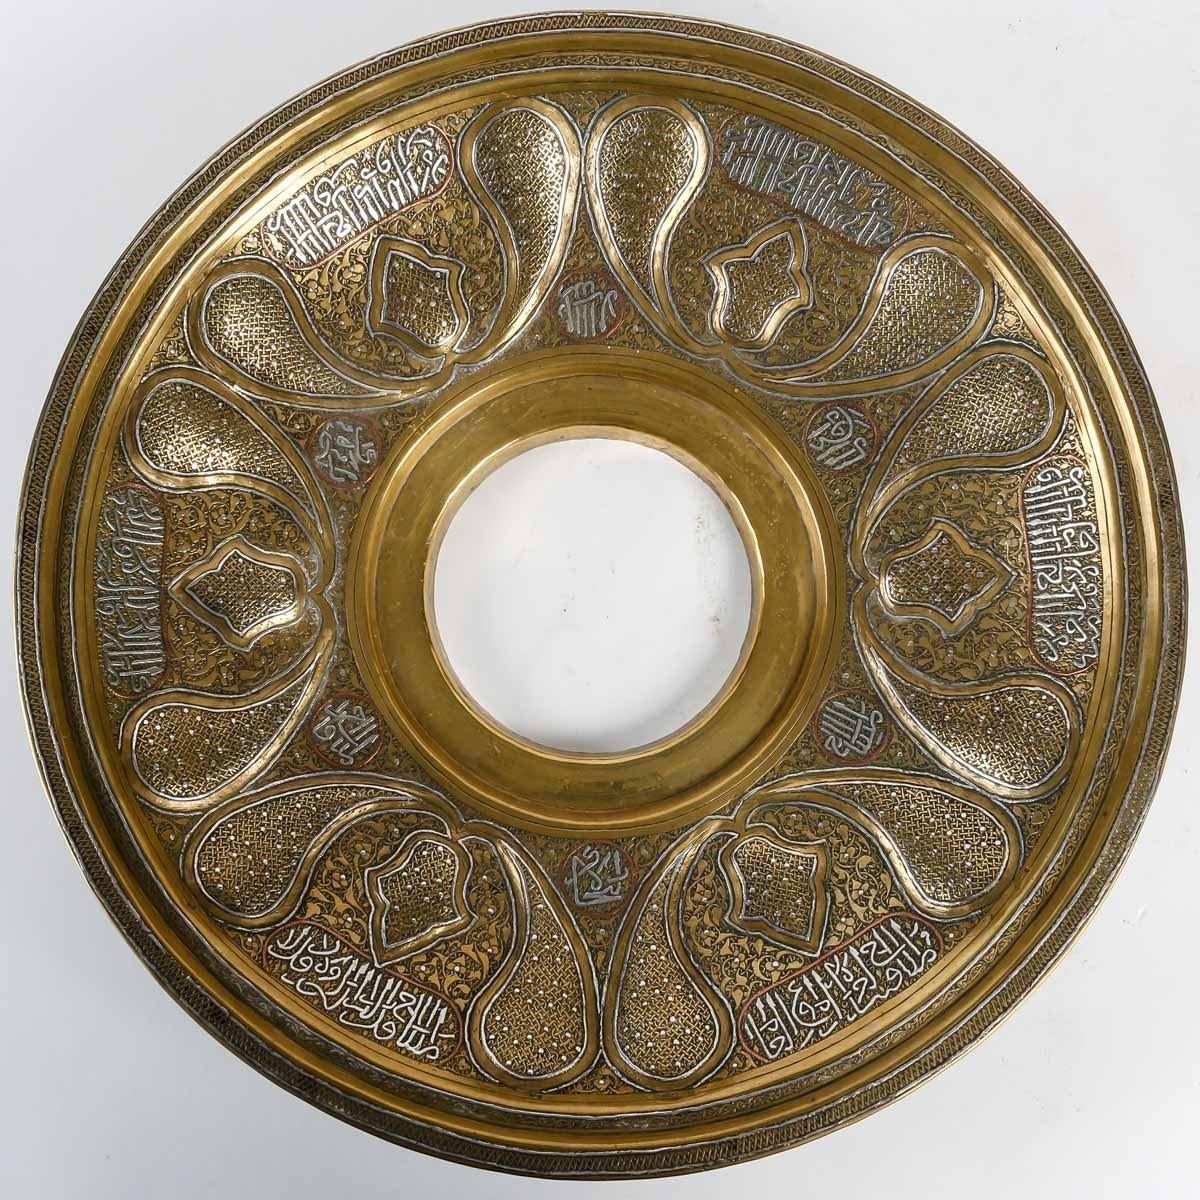 Aiguère in Brass and Silver from the XIXth Century, Syria. 1